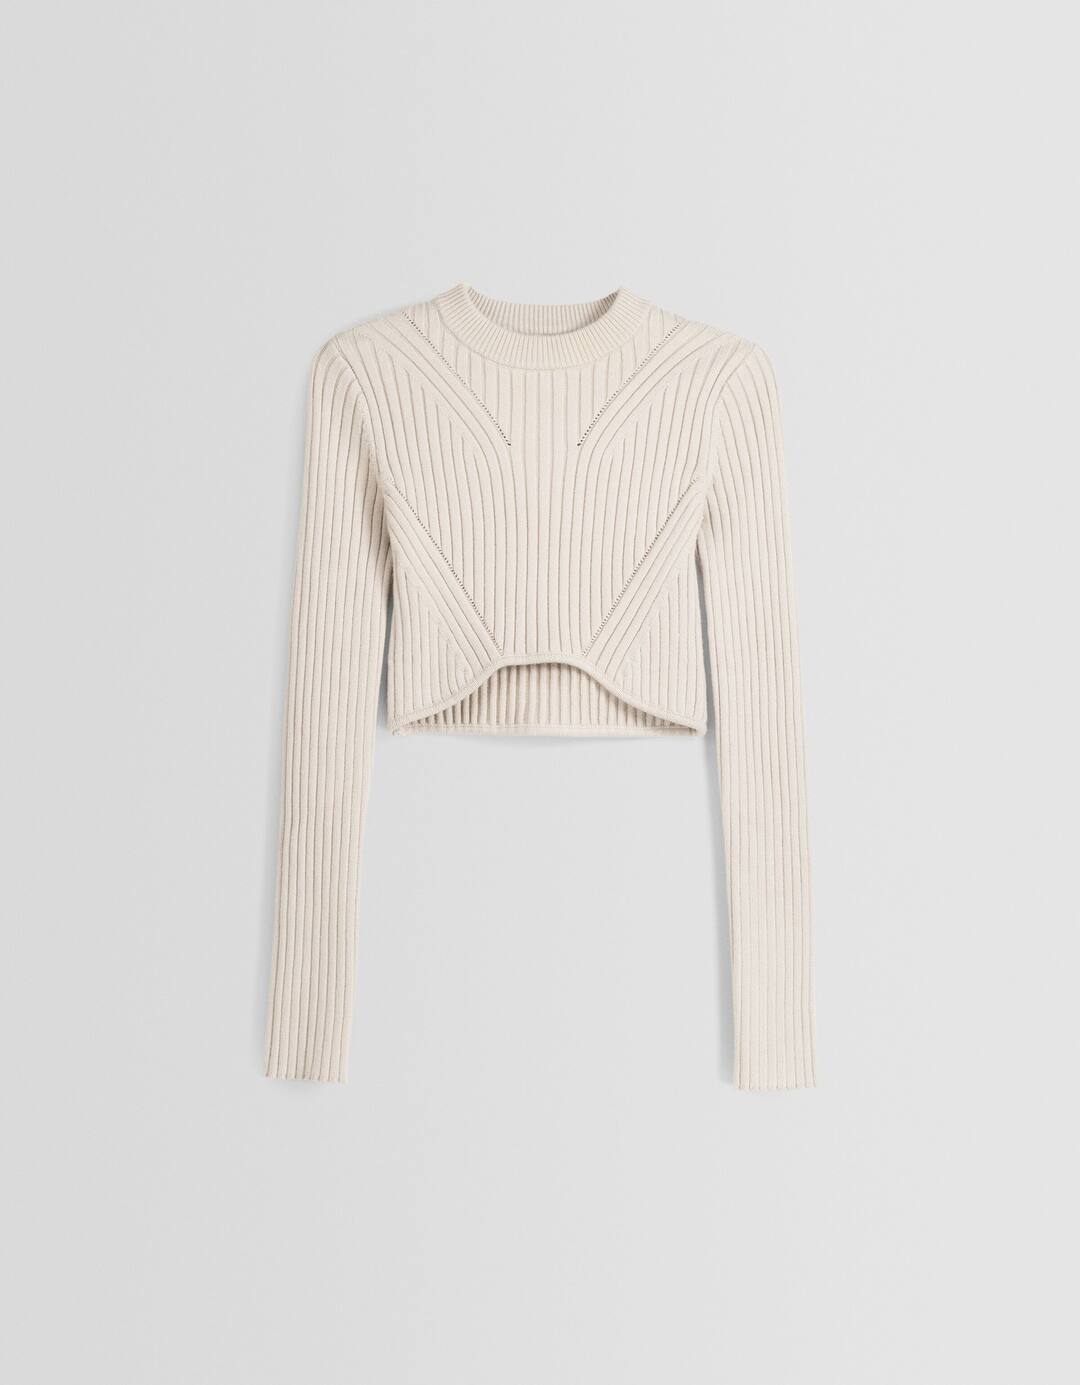 Ribbed knit cropped sweater